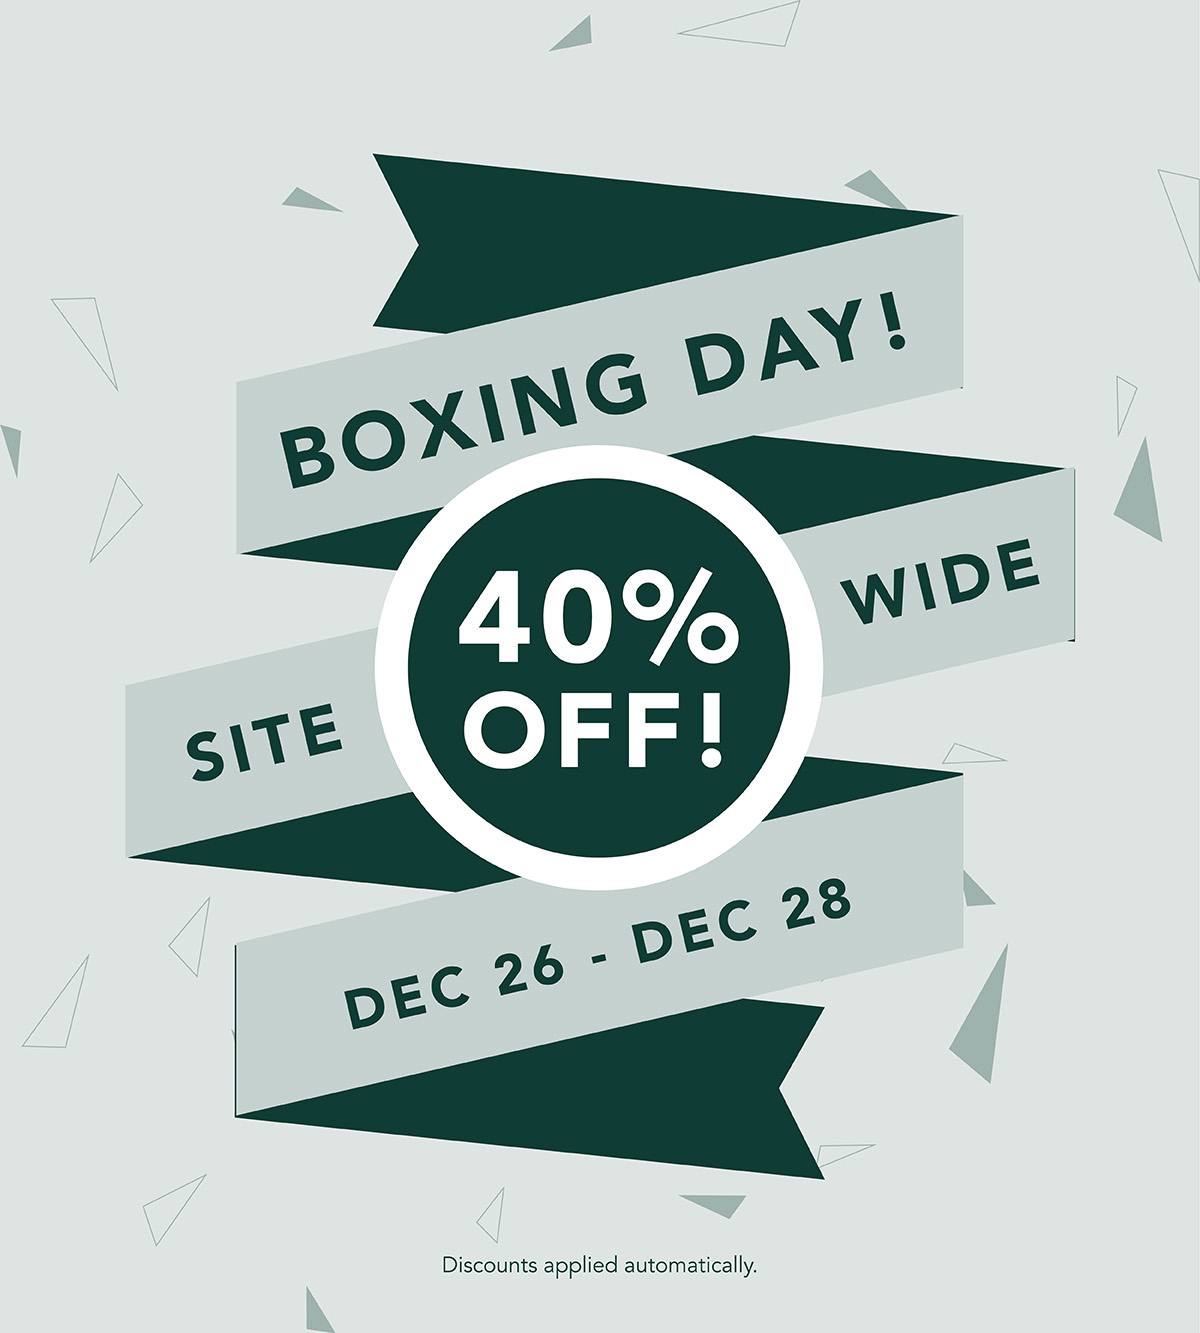 Boxing Day sales! 40% Off sitewide. Dec 26 -28